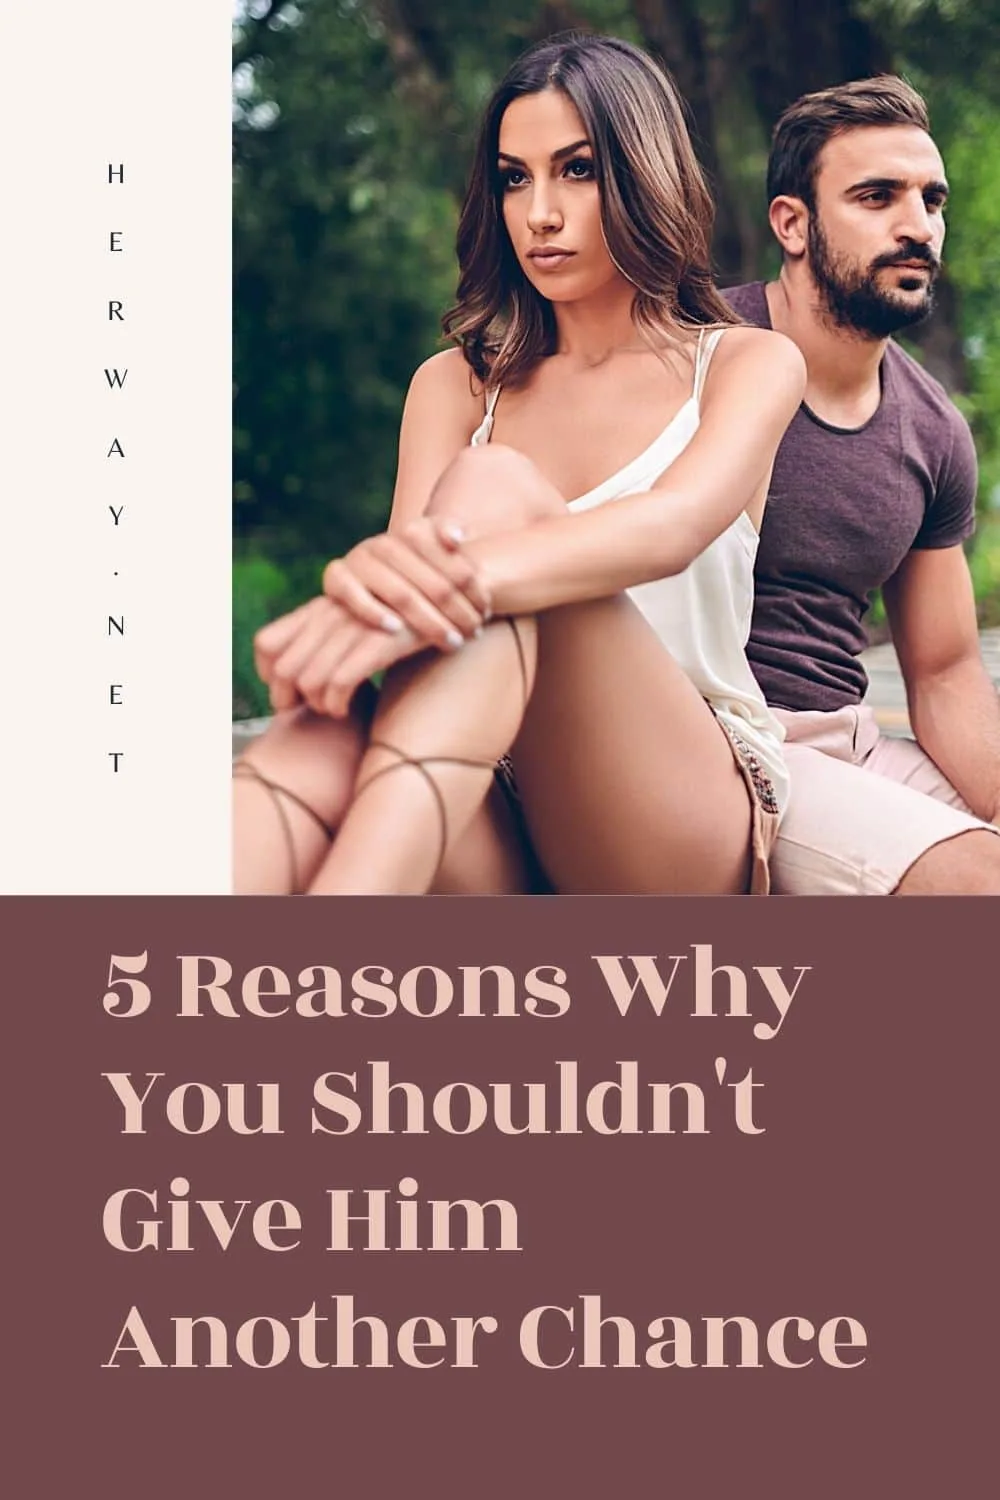 5 Reasons Why You Shouldn't Give Him Another Chance